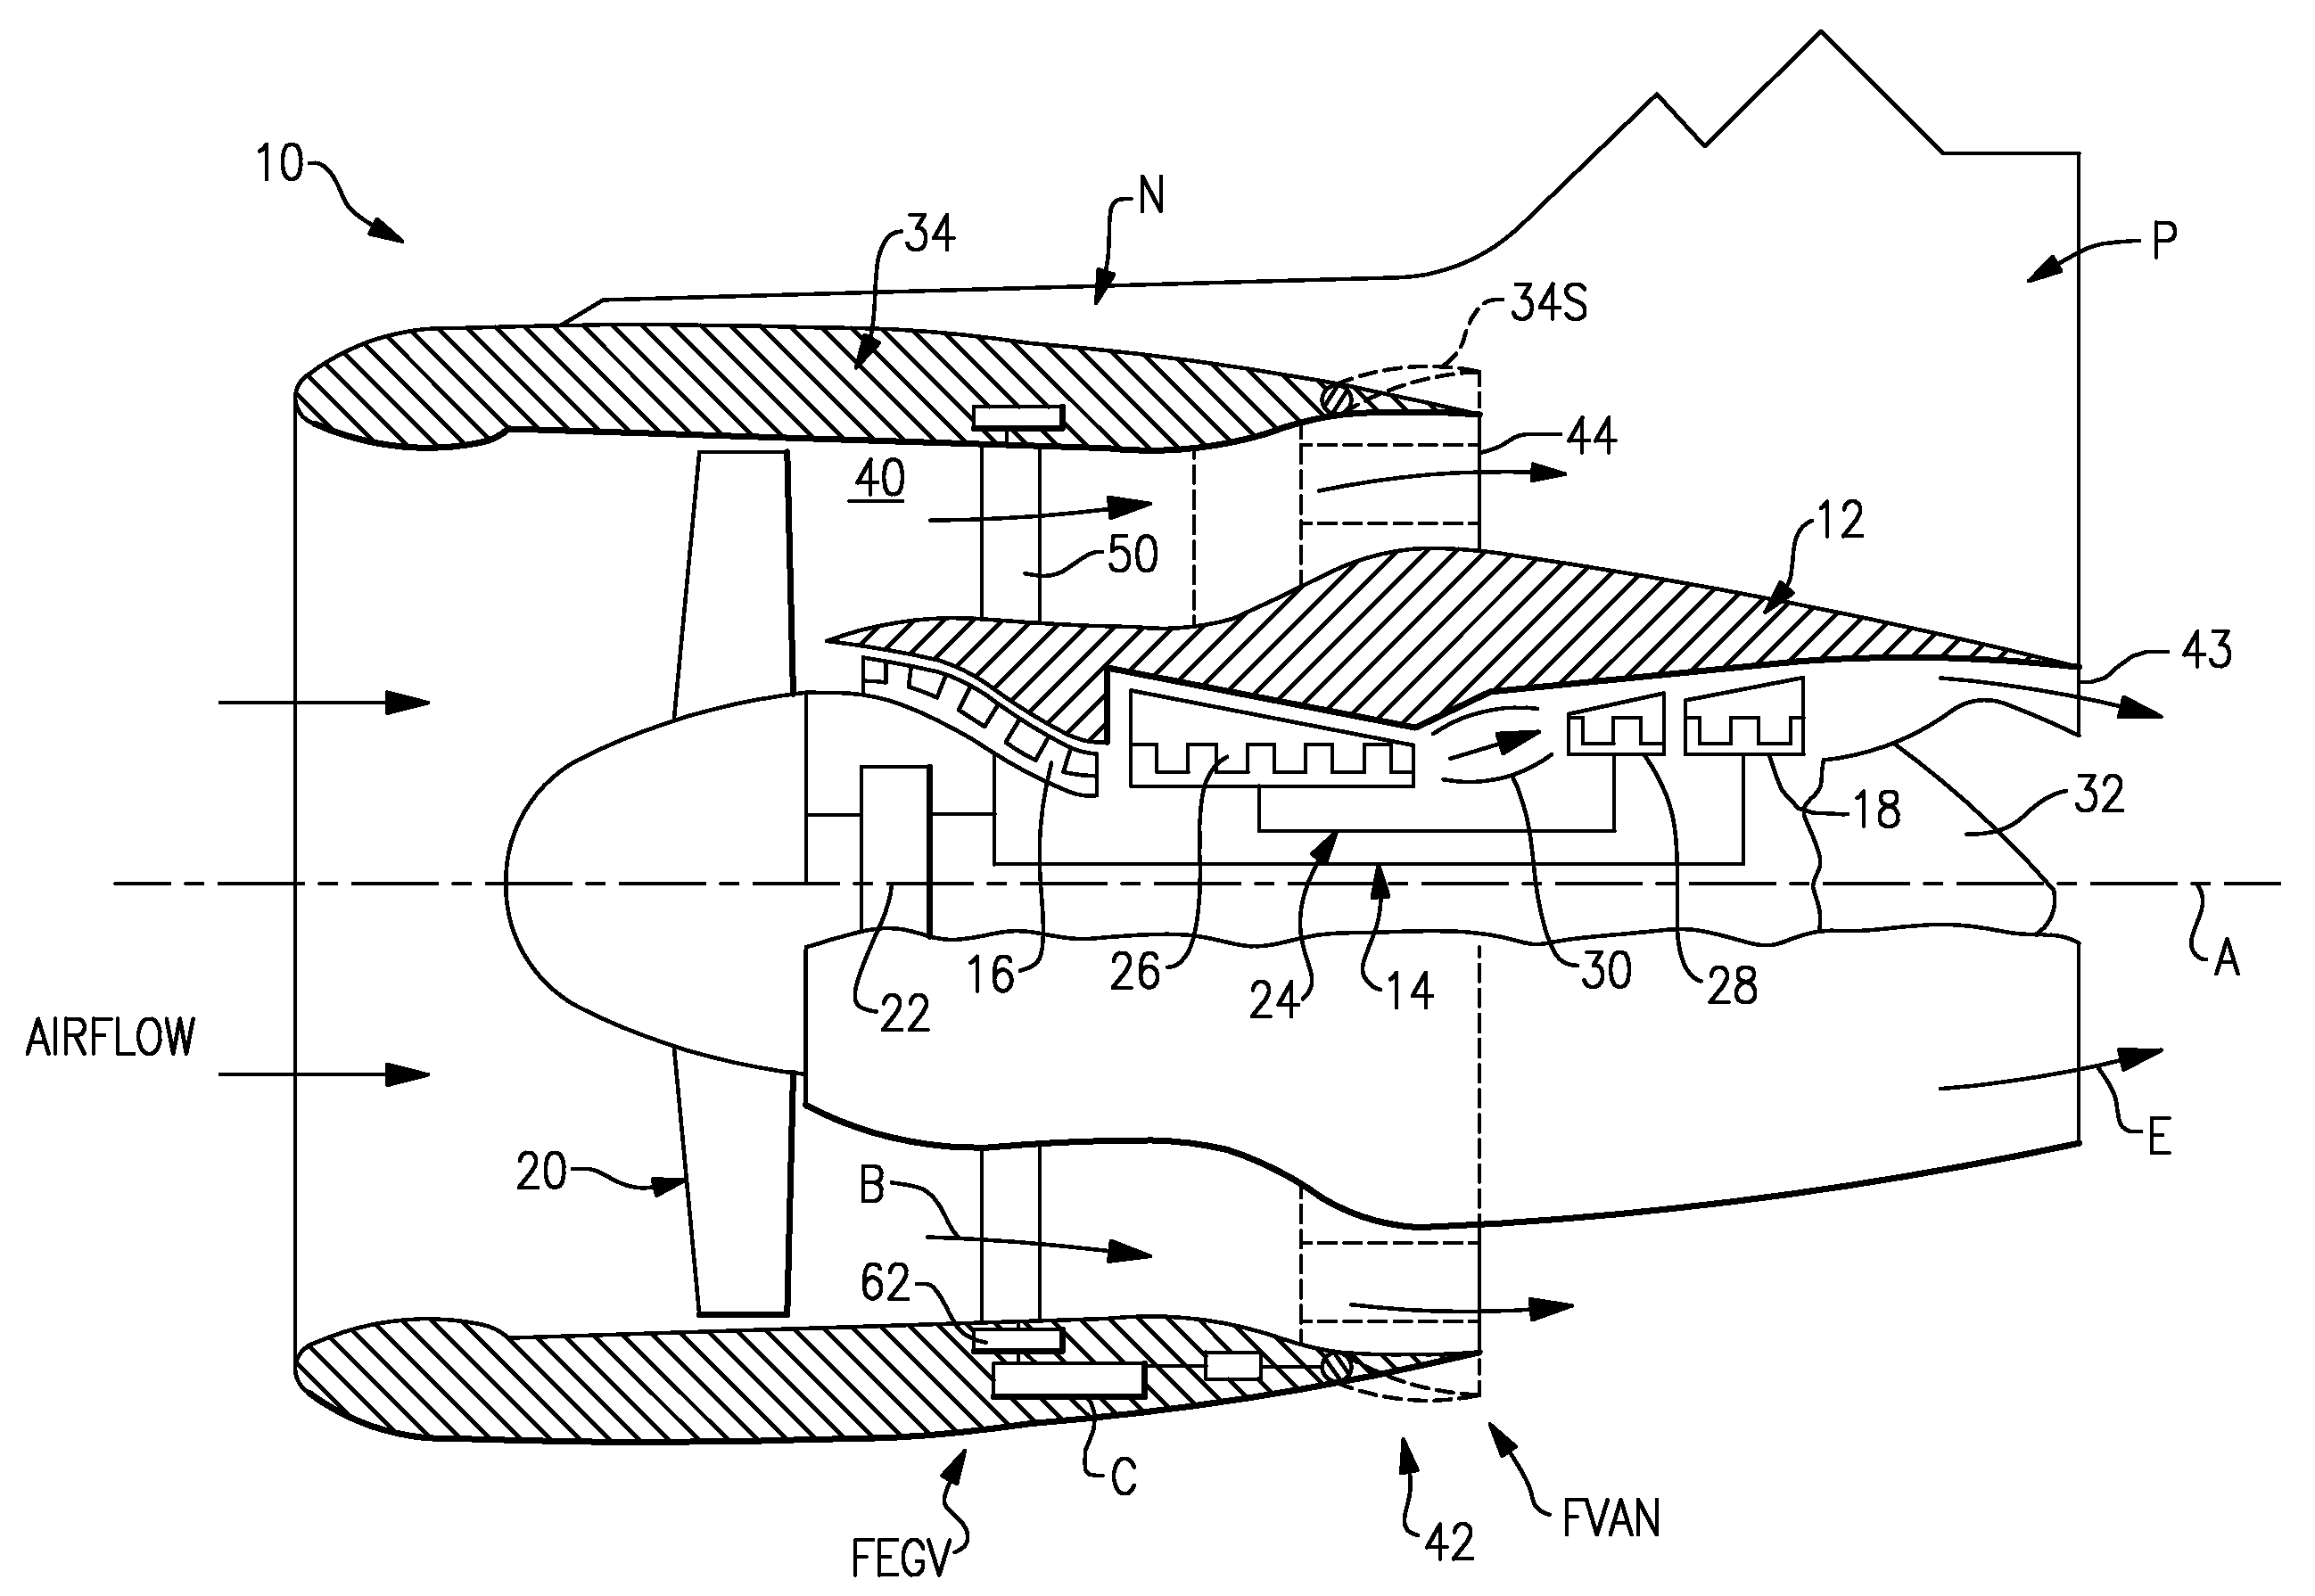 Gas turbine engine with variable geometry fan exit guide vane system